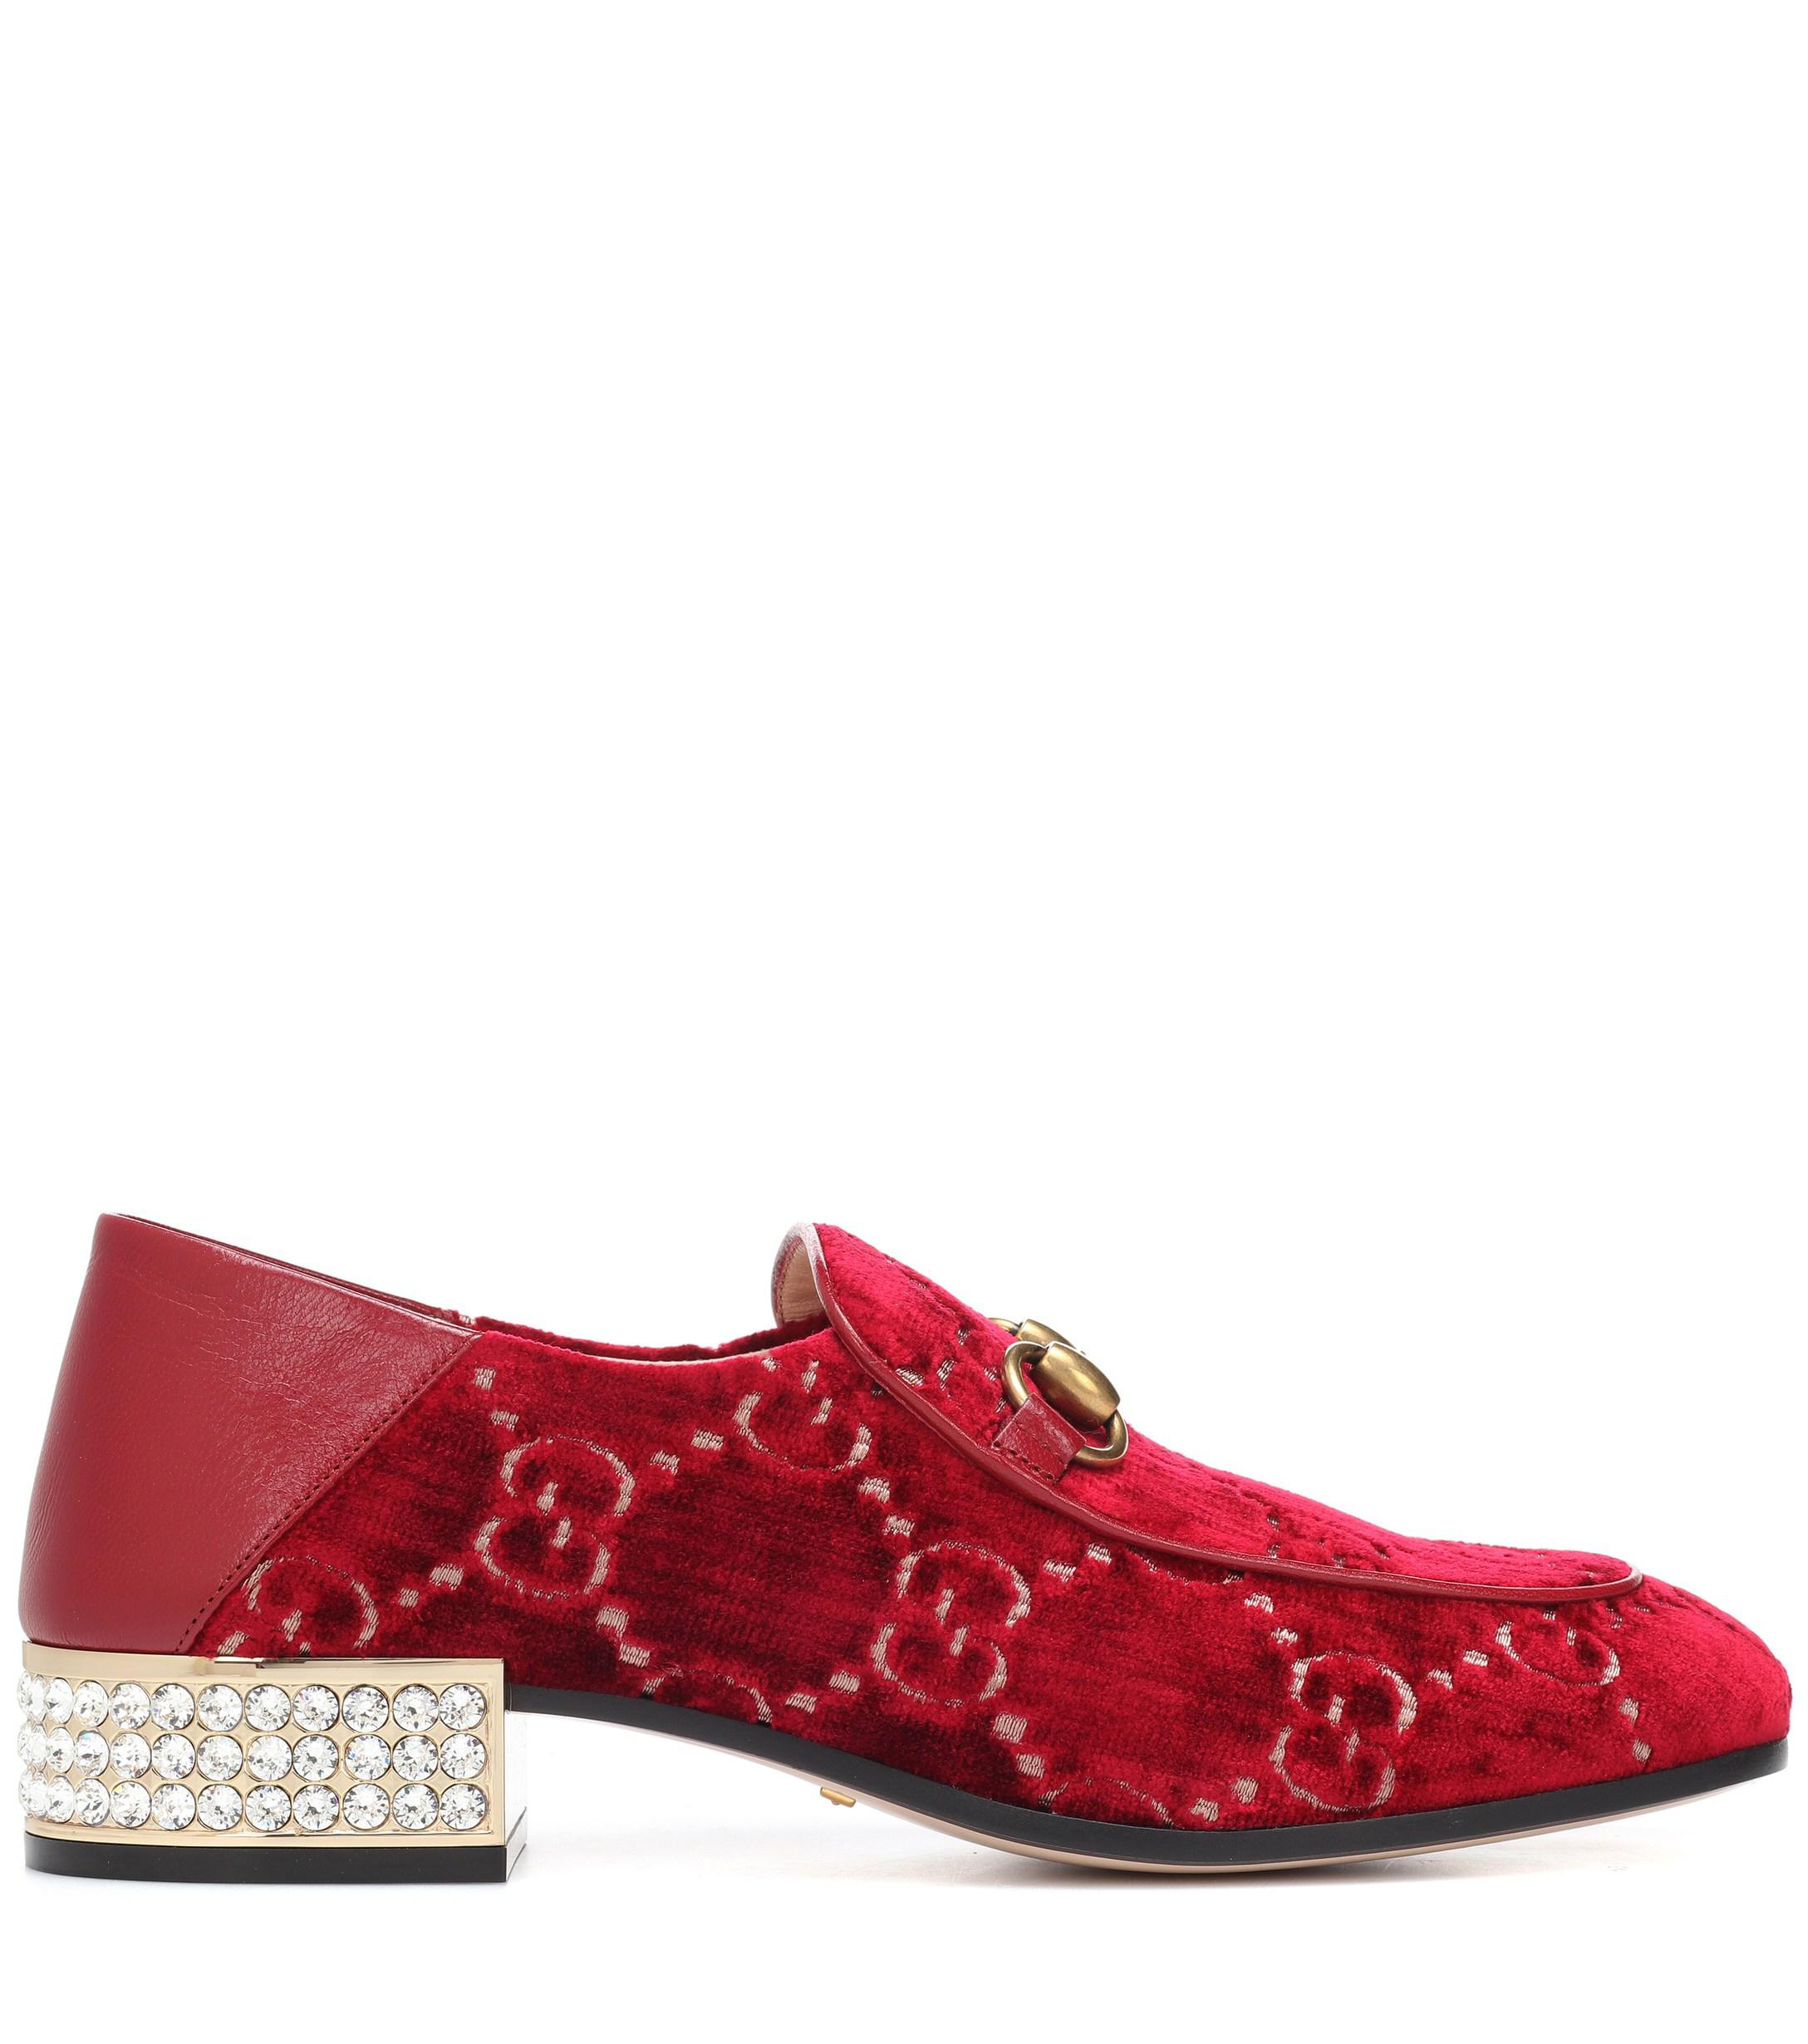 Gucci GG Embellished Velvet Loafers in Red - Lyst